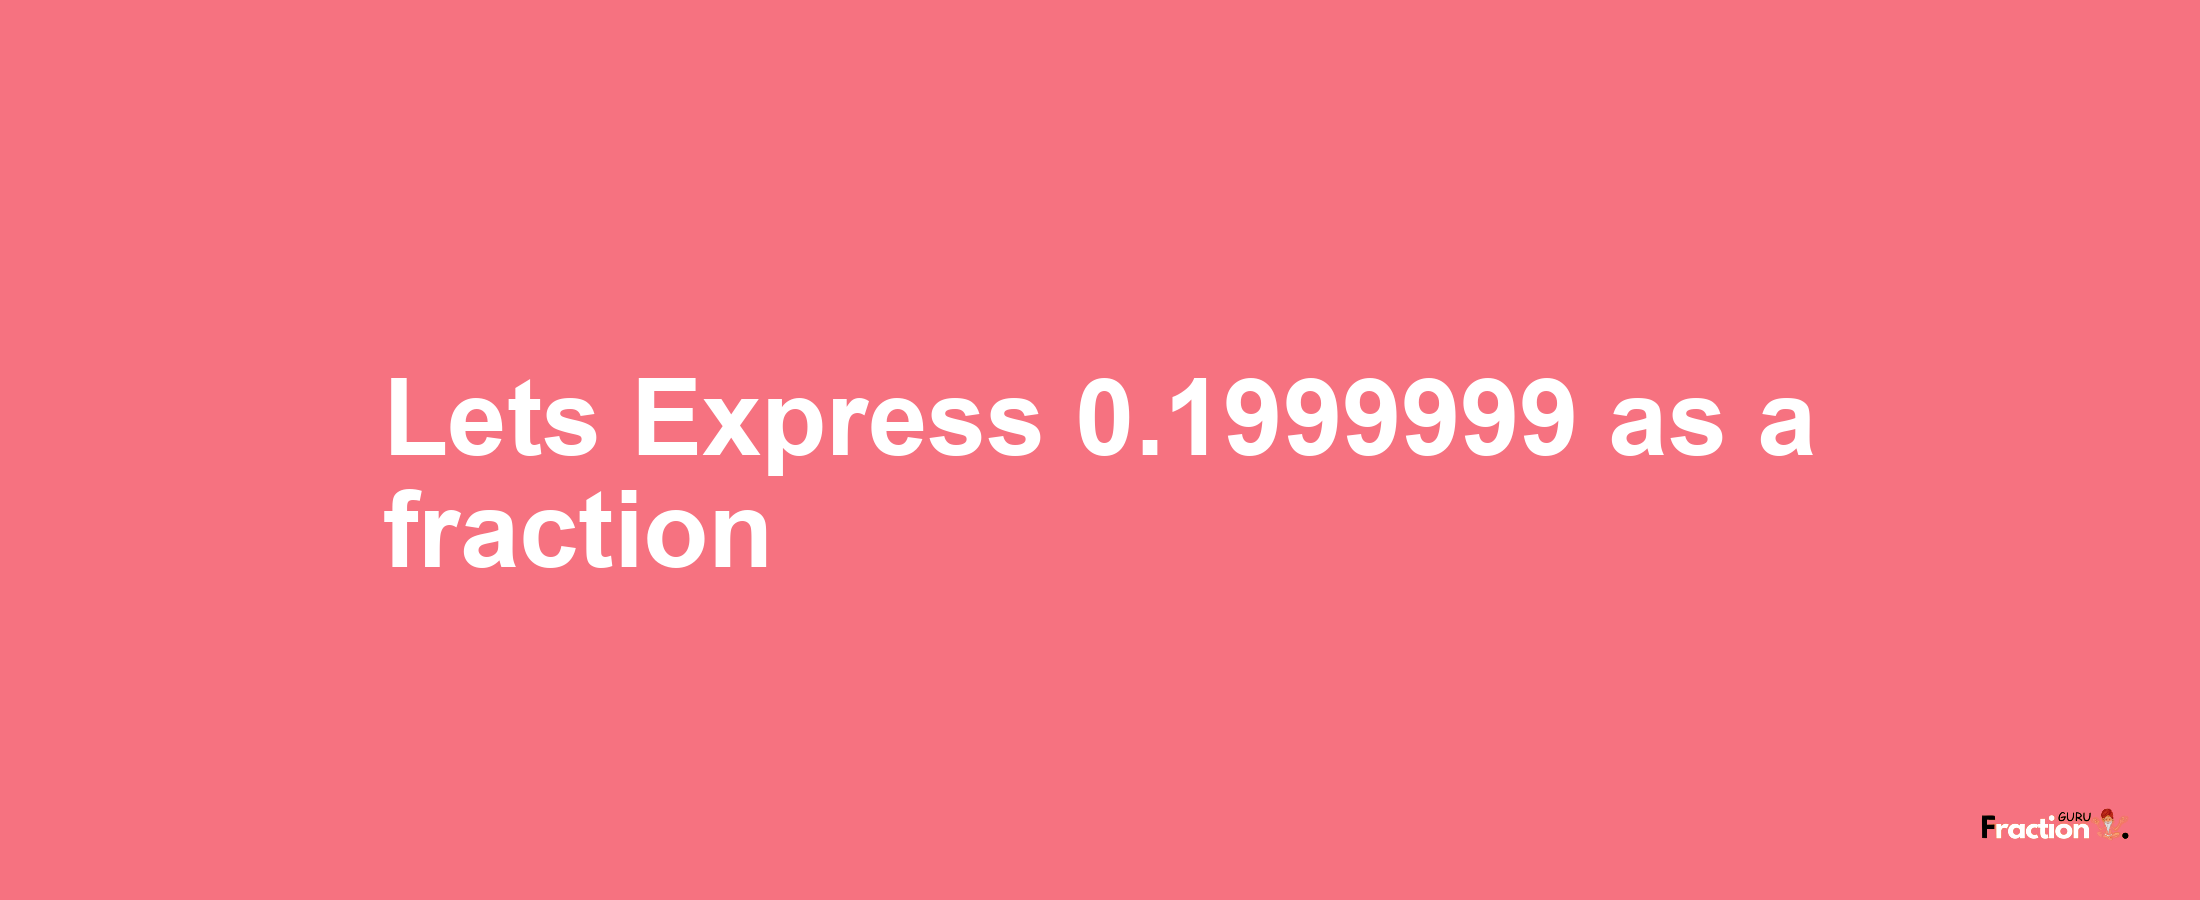 Lets Express 0.1999999 as afraction